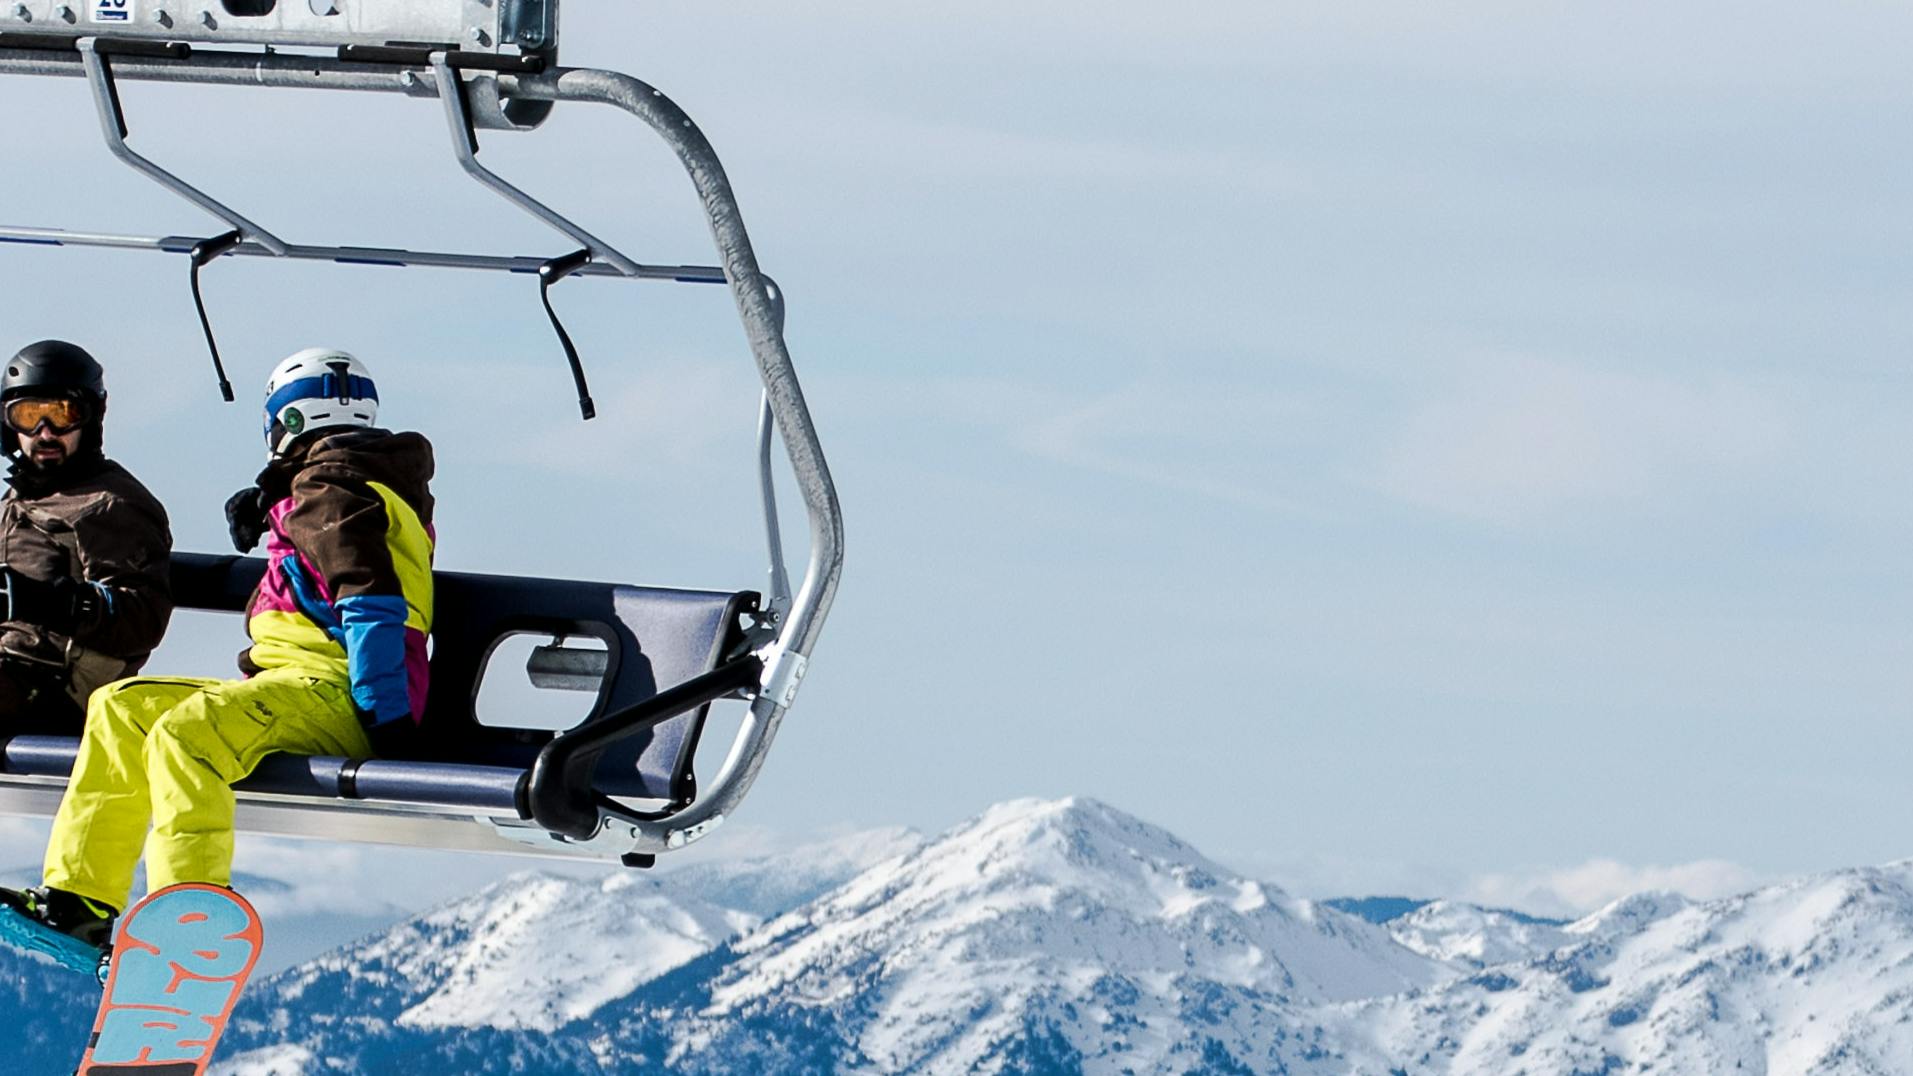 Two snowboarders sitting on a chairlift with mountains in the background.